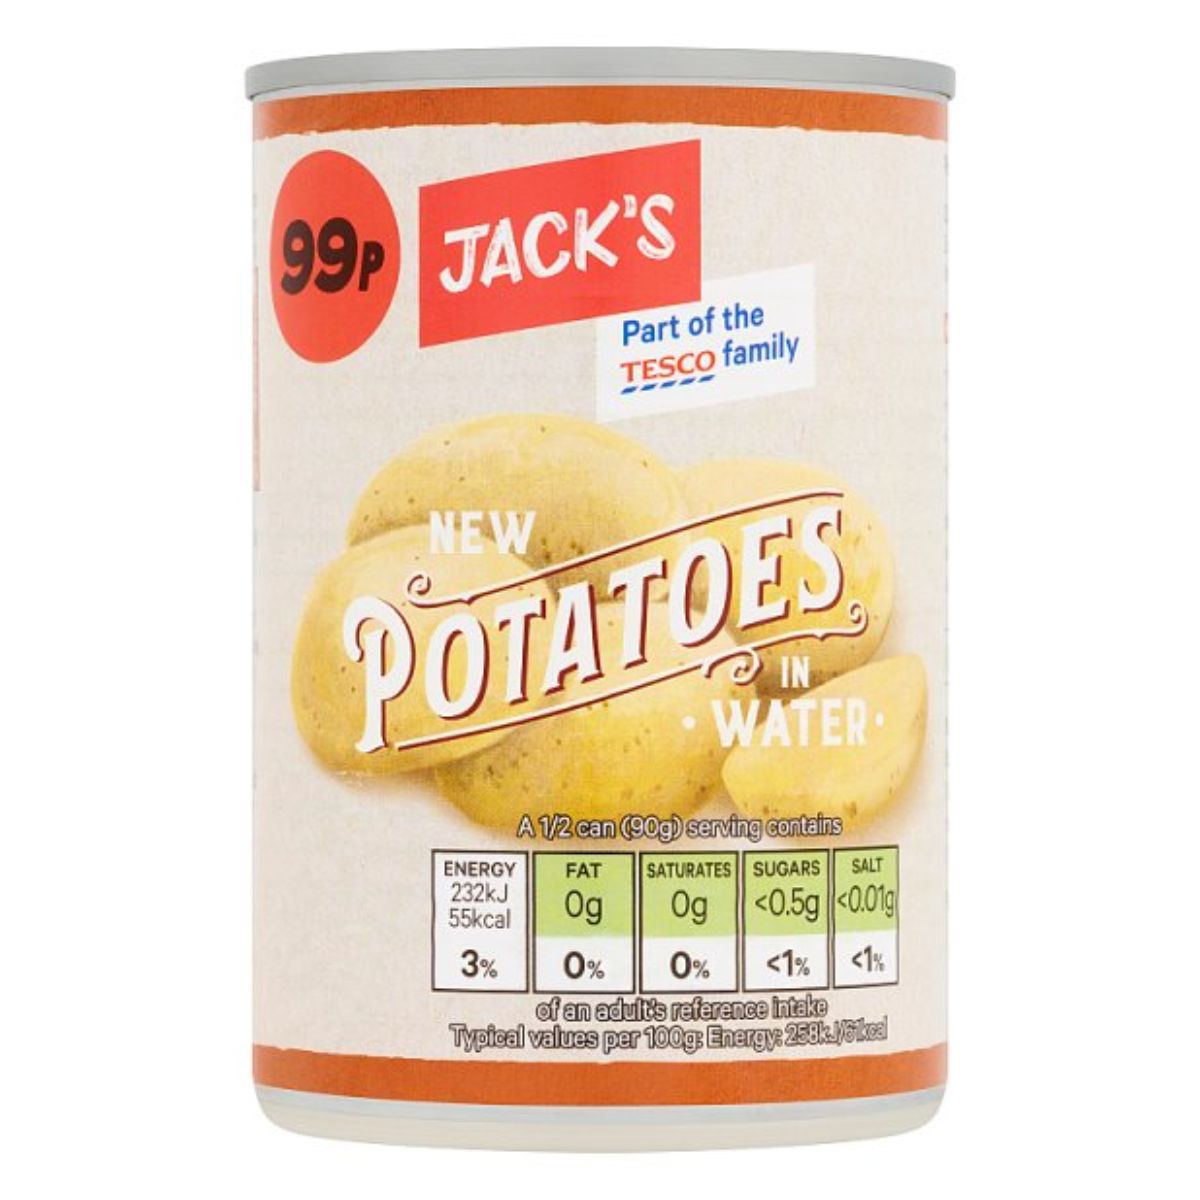 A can of Jacks - New Potatoes in Water - 300g with nutritional information displayed, indicating it is part of the Tesco family.